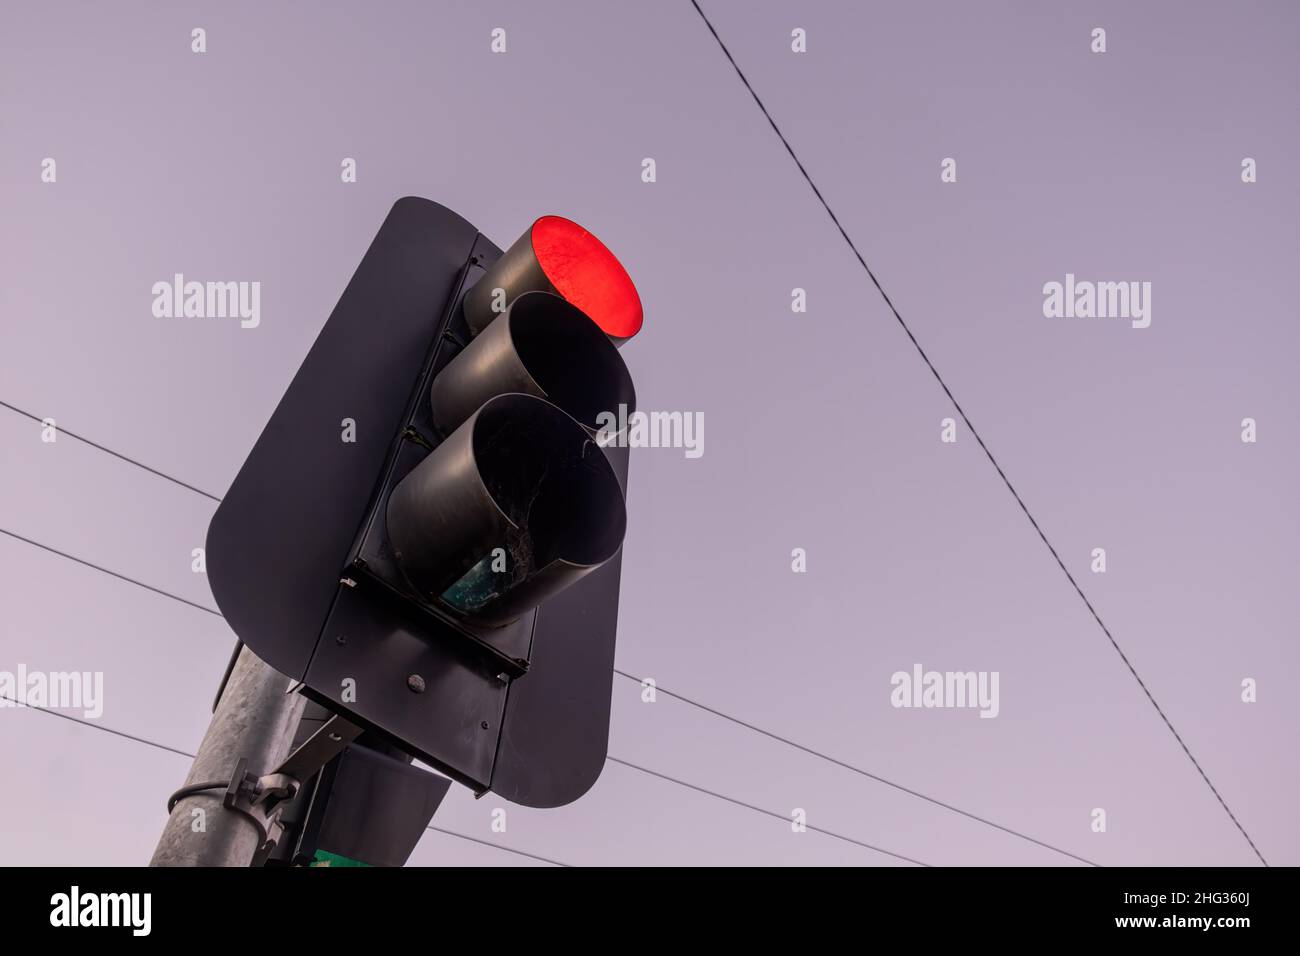 Looking up at red traffic light against the sky at sunset with copy space Stock Photo